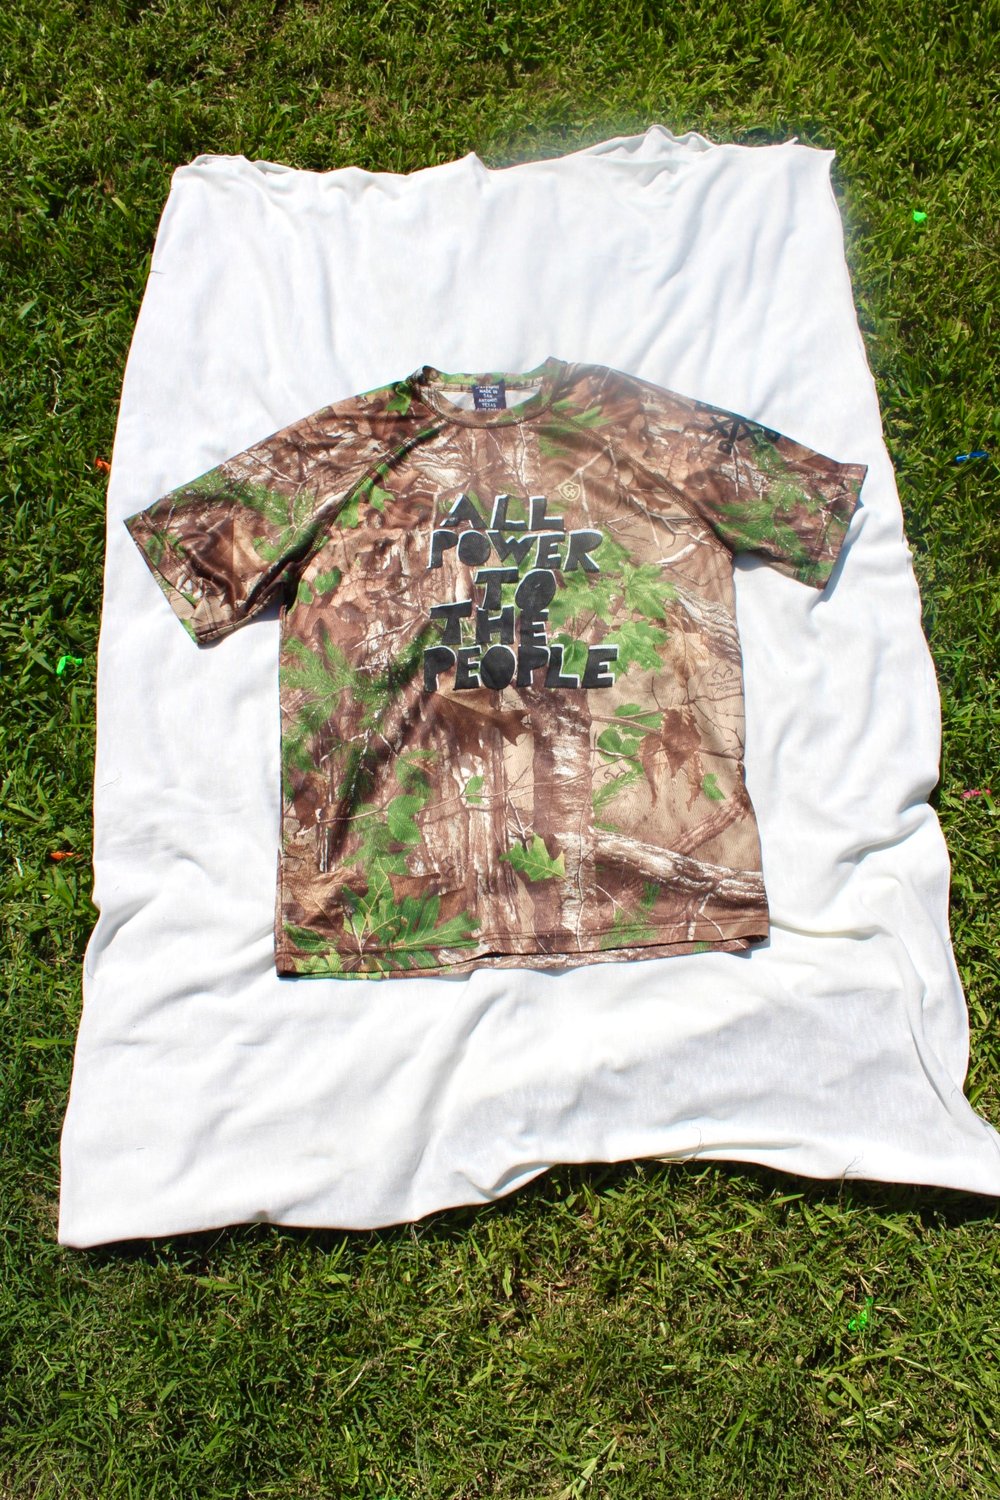 the all power tee in forest camo